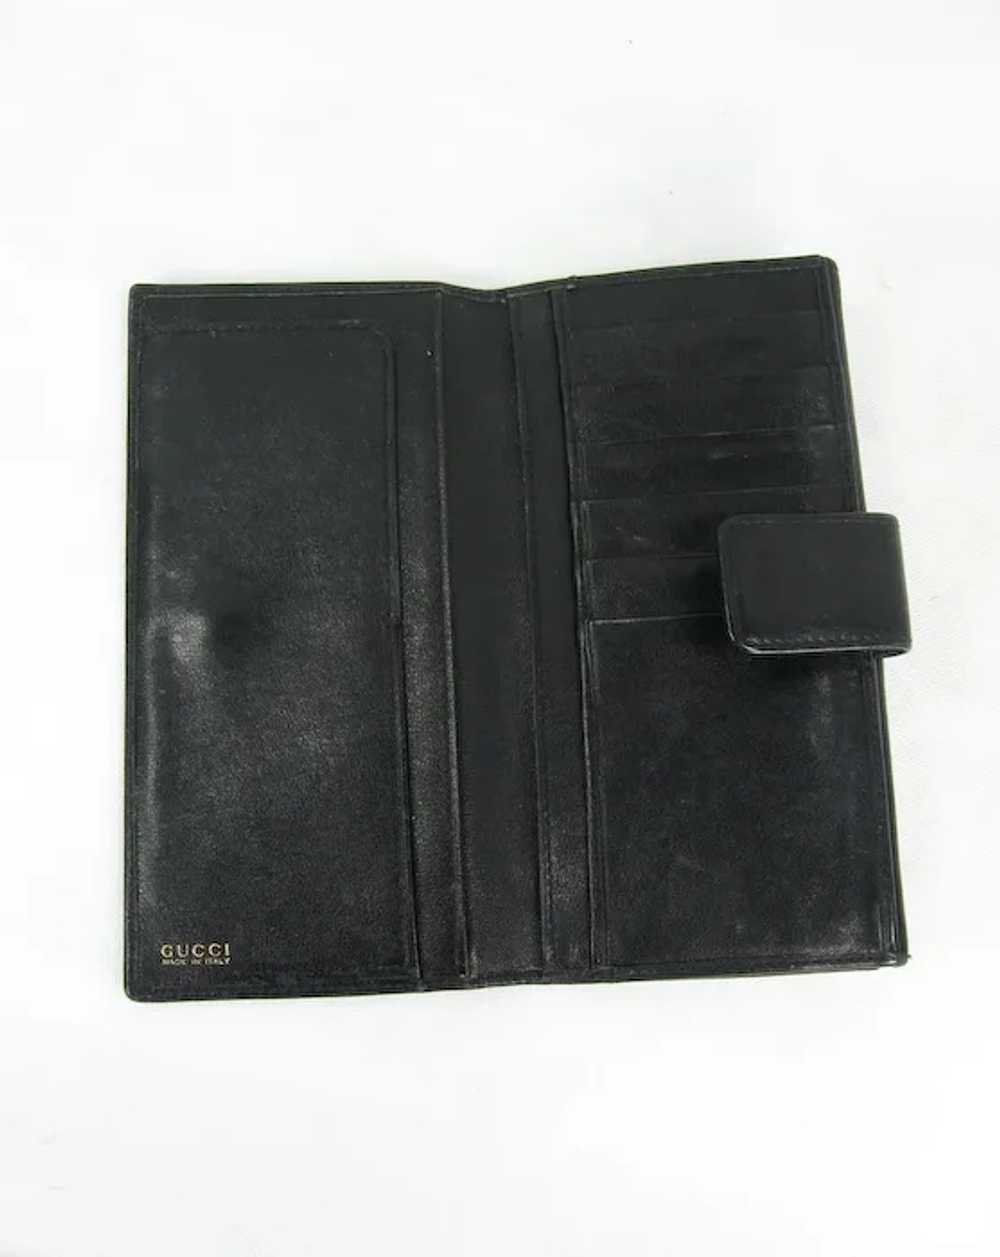 Gucci Black Leather & Bamboo Continental Wallet - image 2